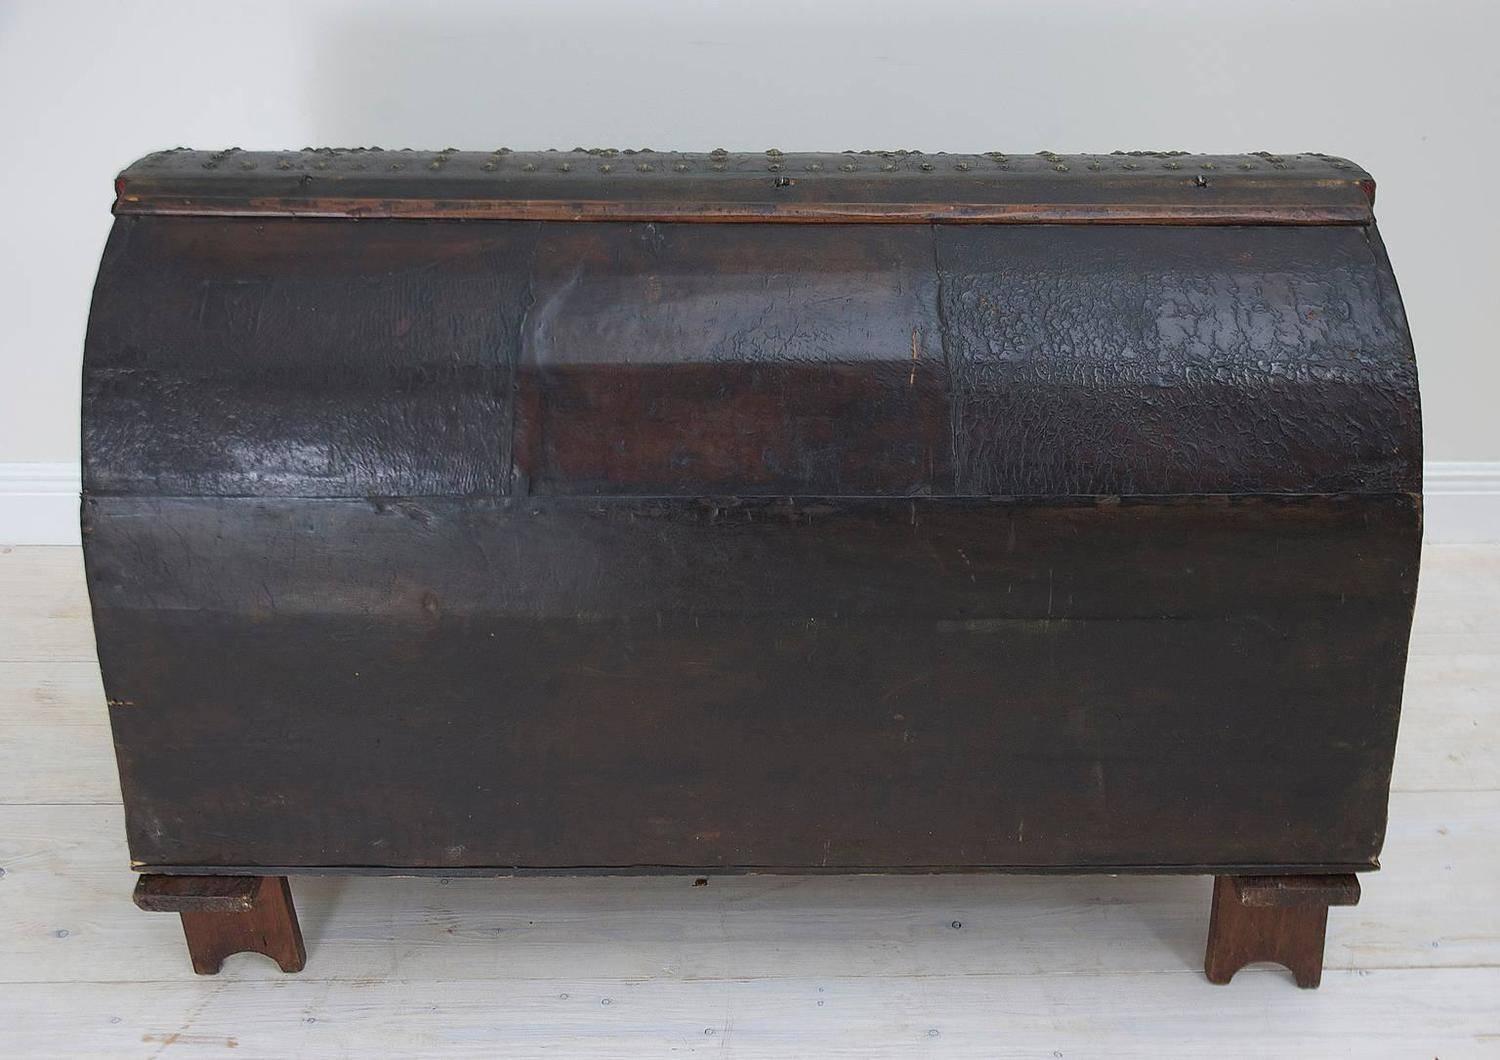 Brass 18th Century Spanish Leather-Bound Chest on Stand with Decorative Nailheads